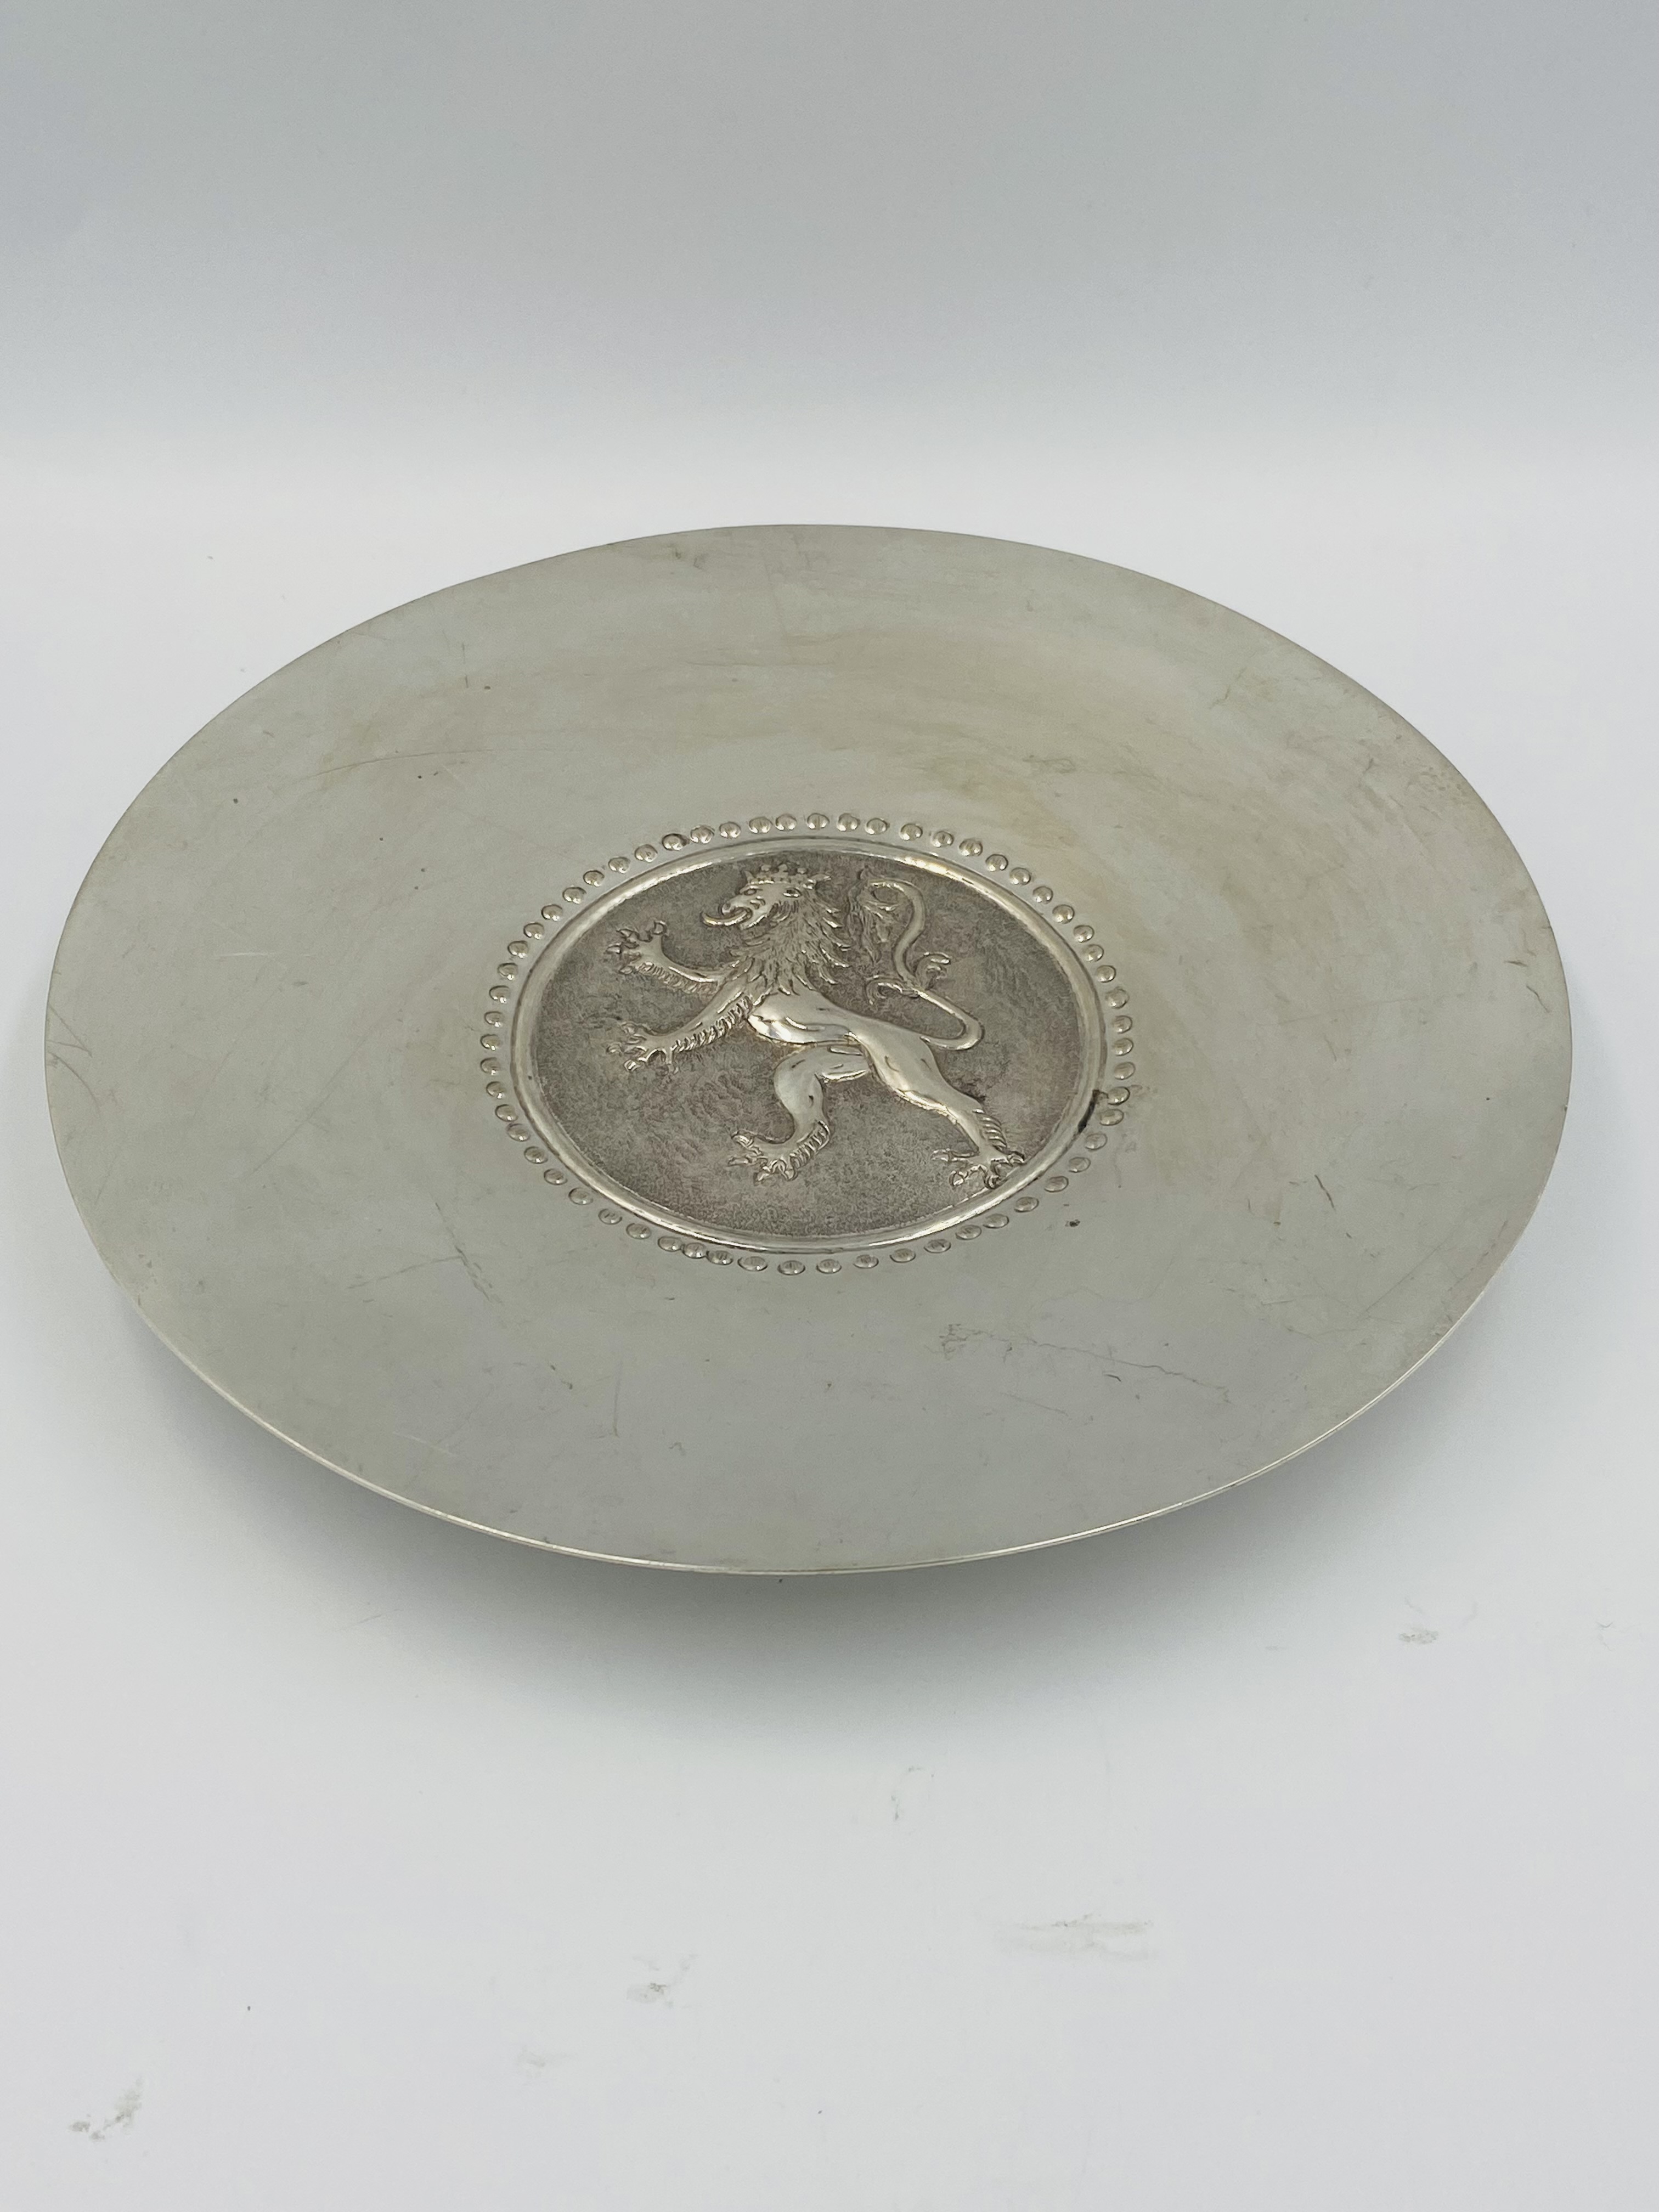 Stephanides & Son 830 silver dish - Image 2 of 4